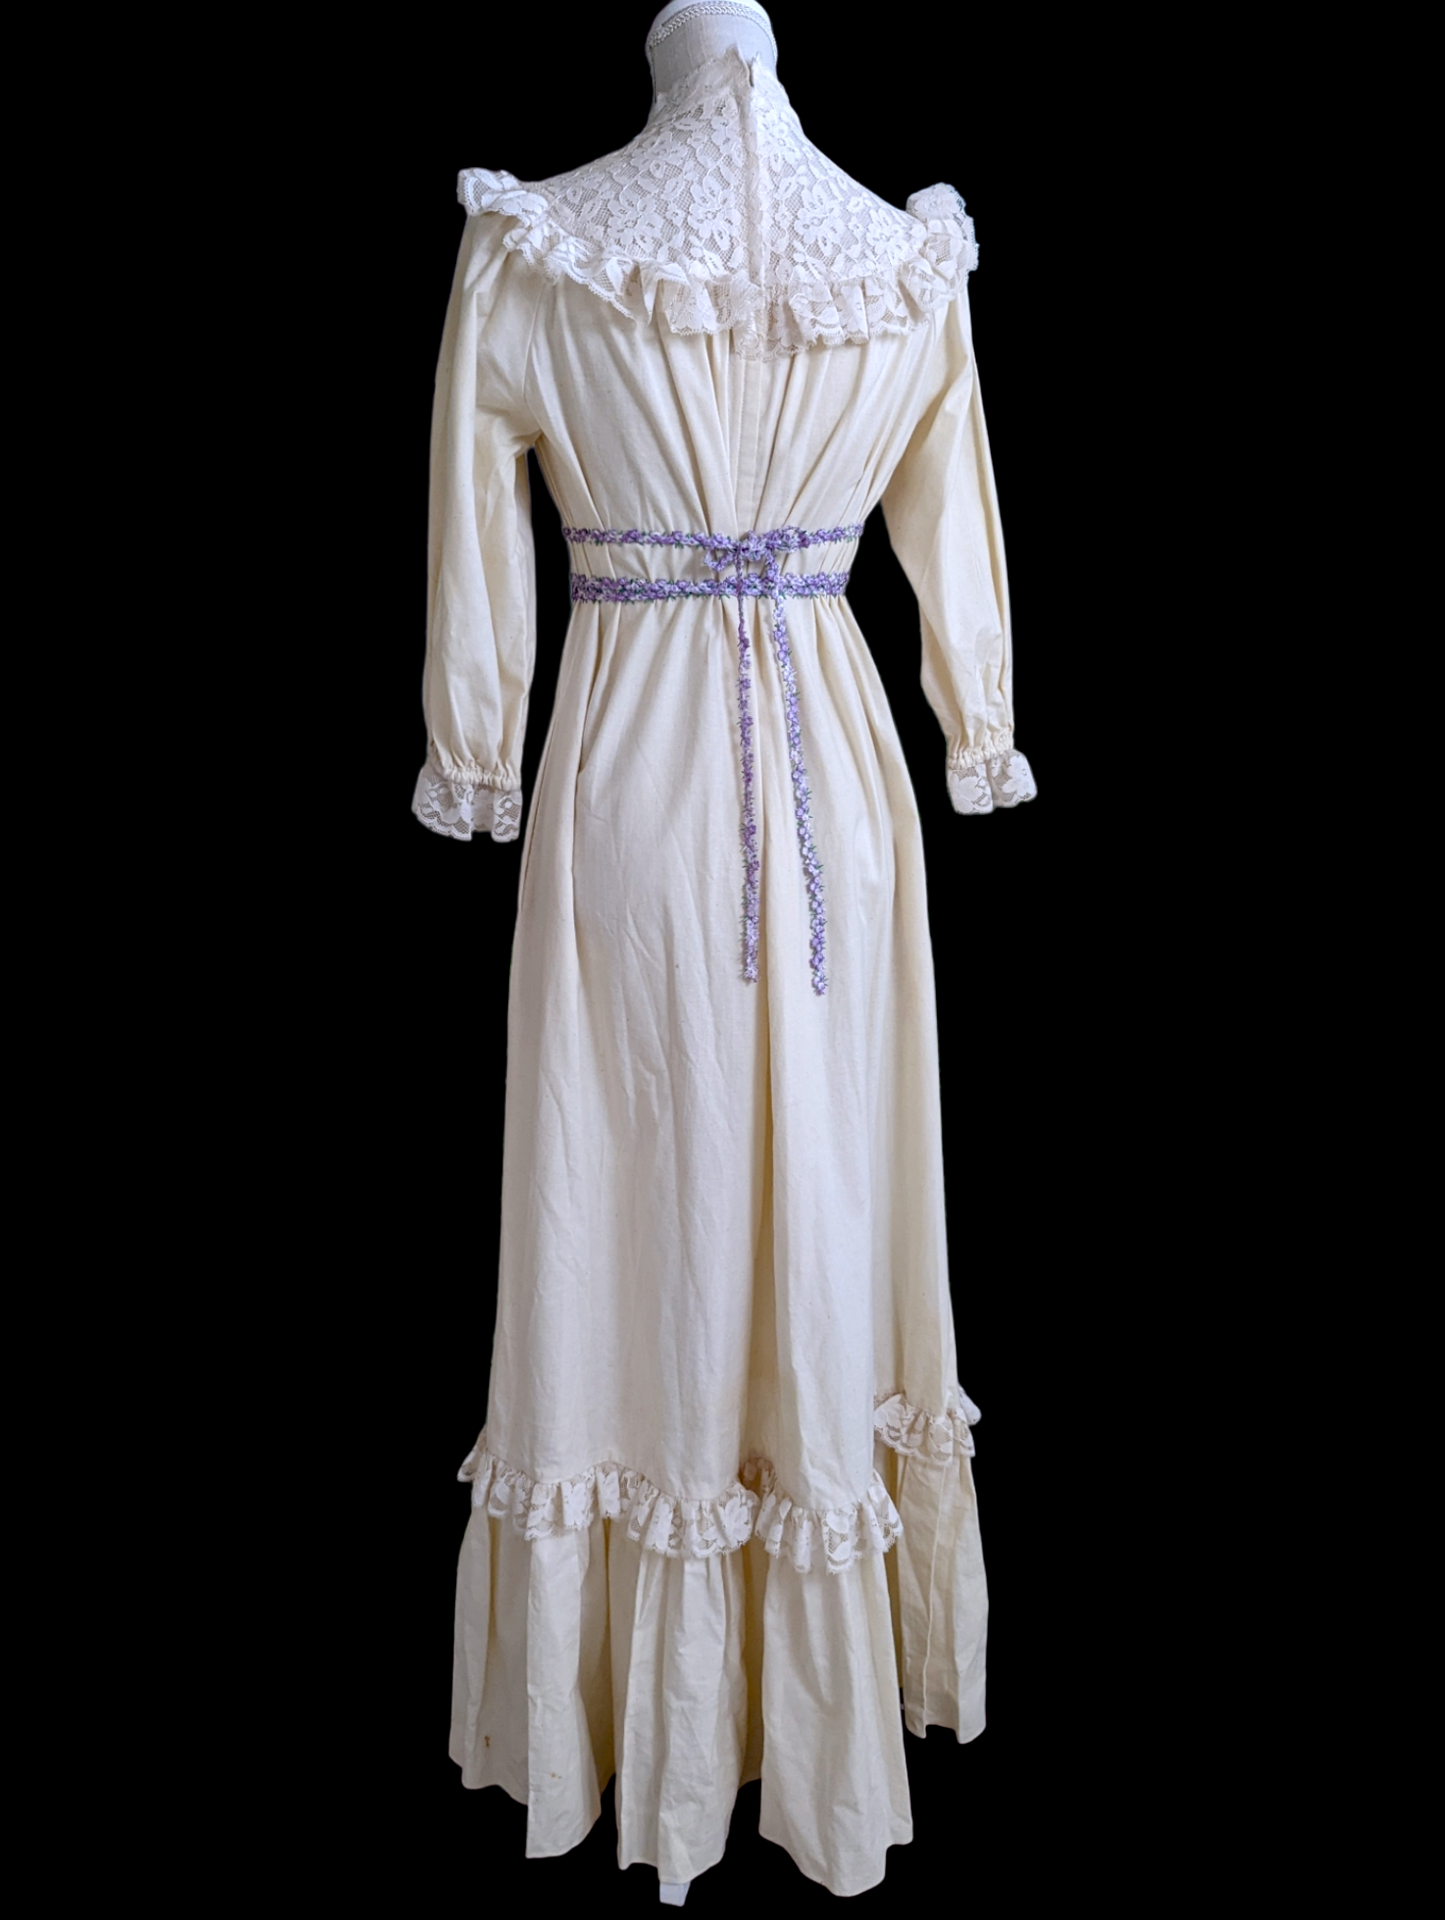 1970s Princess Kaiulani Wedding Dress with Half Sleeves, Victorian Inspired Design and Ruffles with Purple Flower Ribbon and Pockets